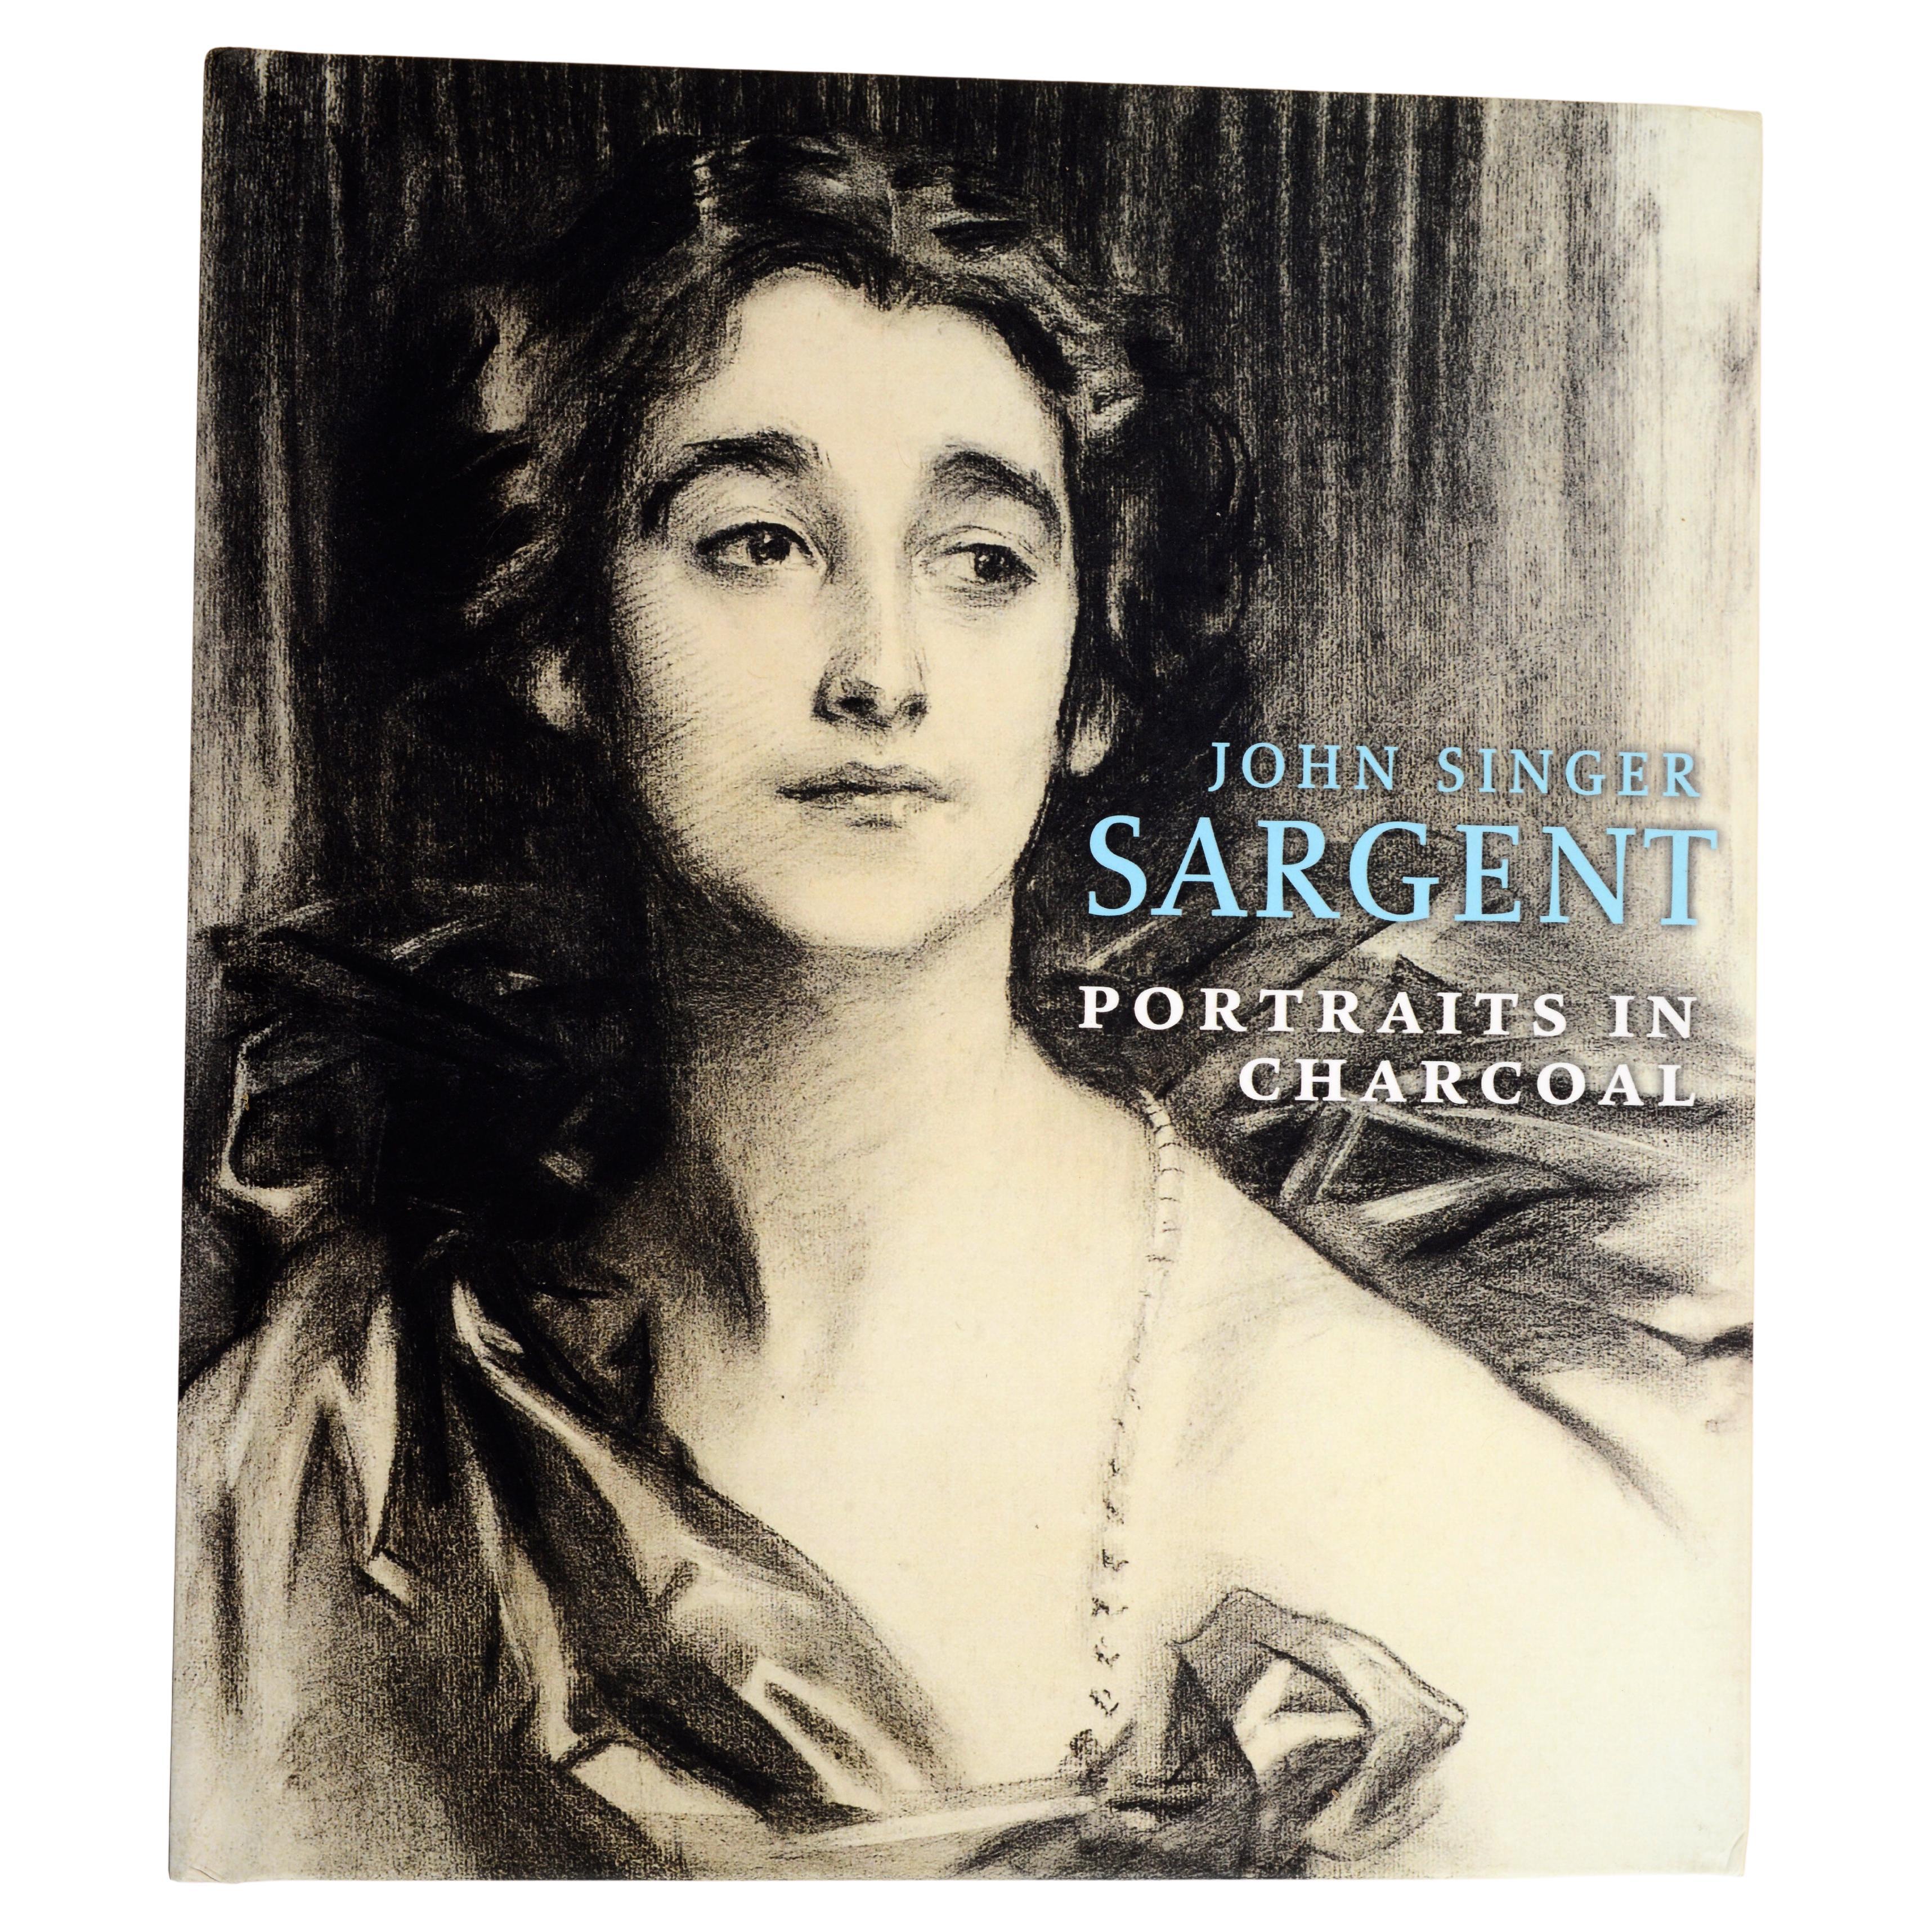 John Singer Sargent Portraits in Charcoal, by Richard Ormond, 1st Ed